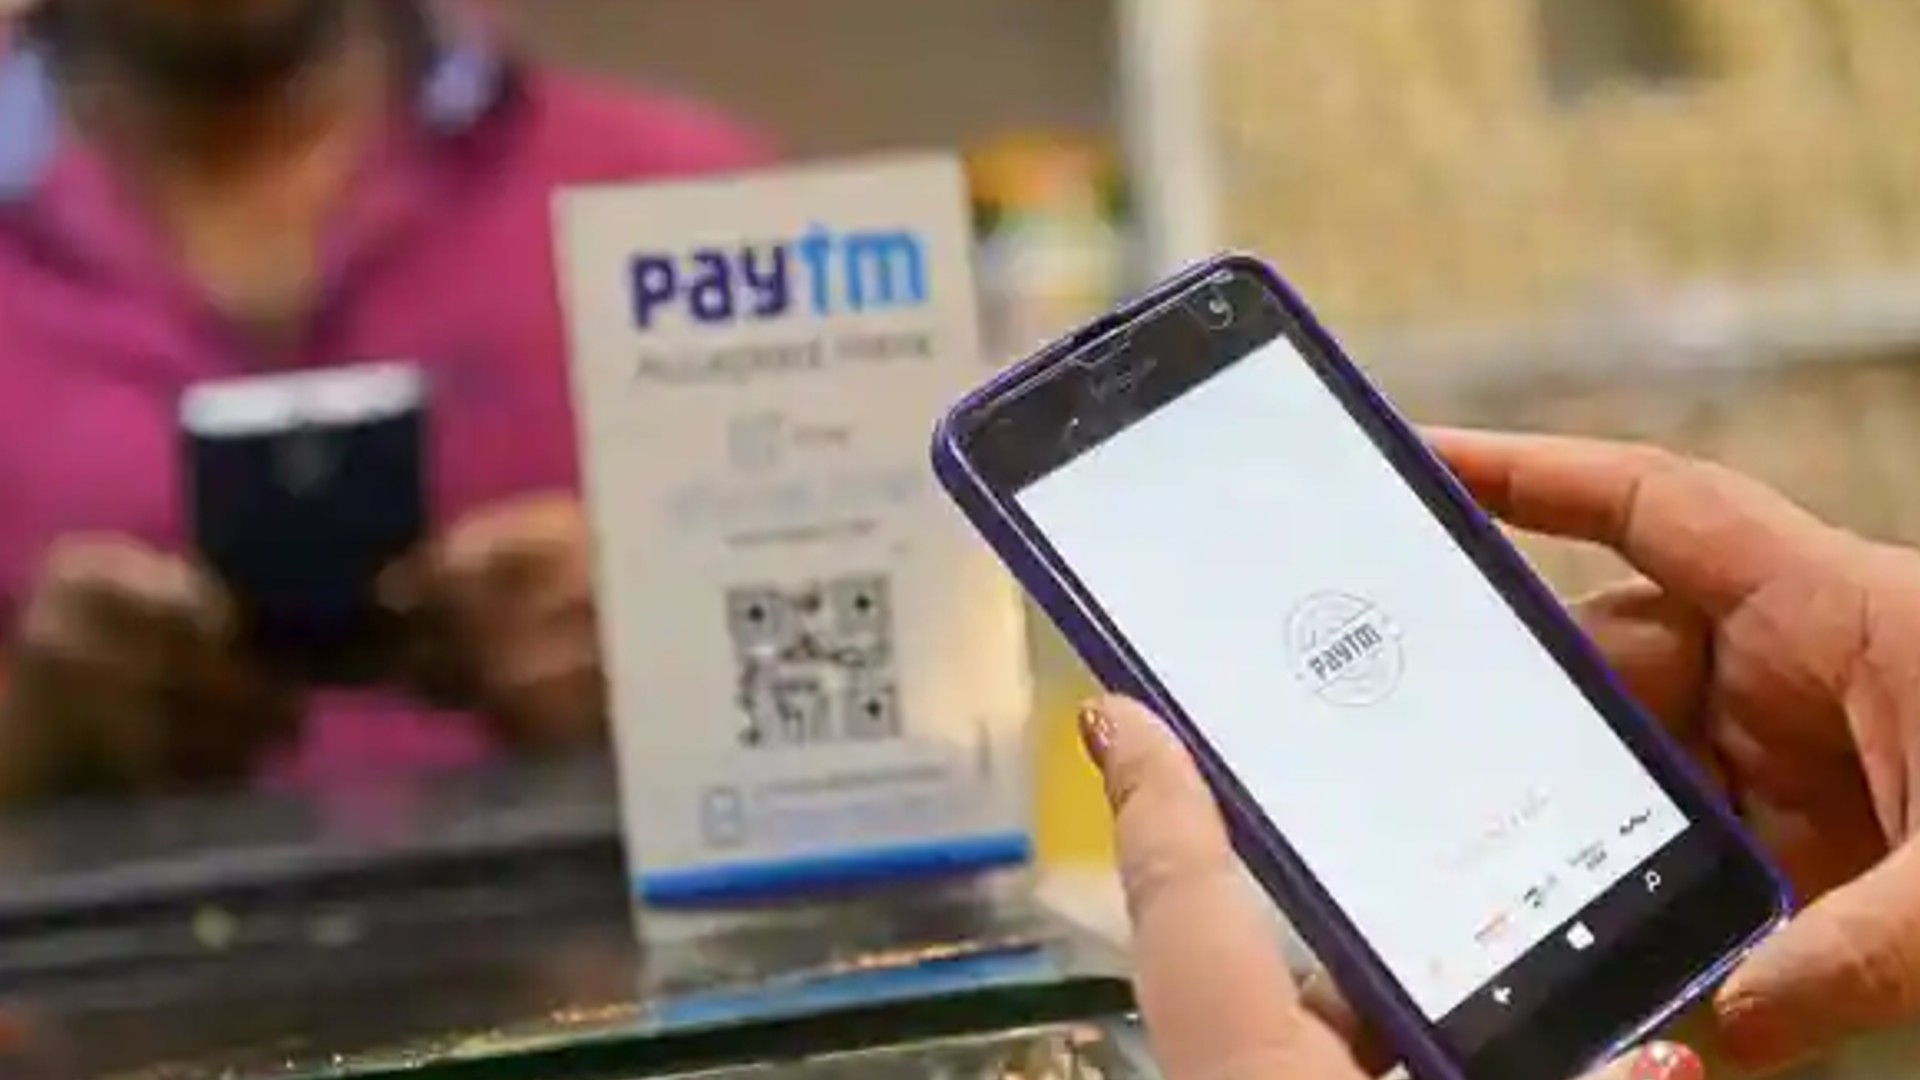 Paytm, HDFC Bank Join Together To Provide Loans, Payment Solutions & More